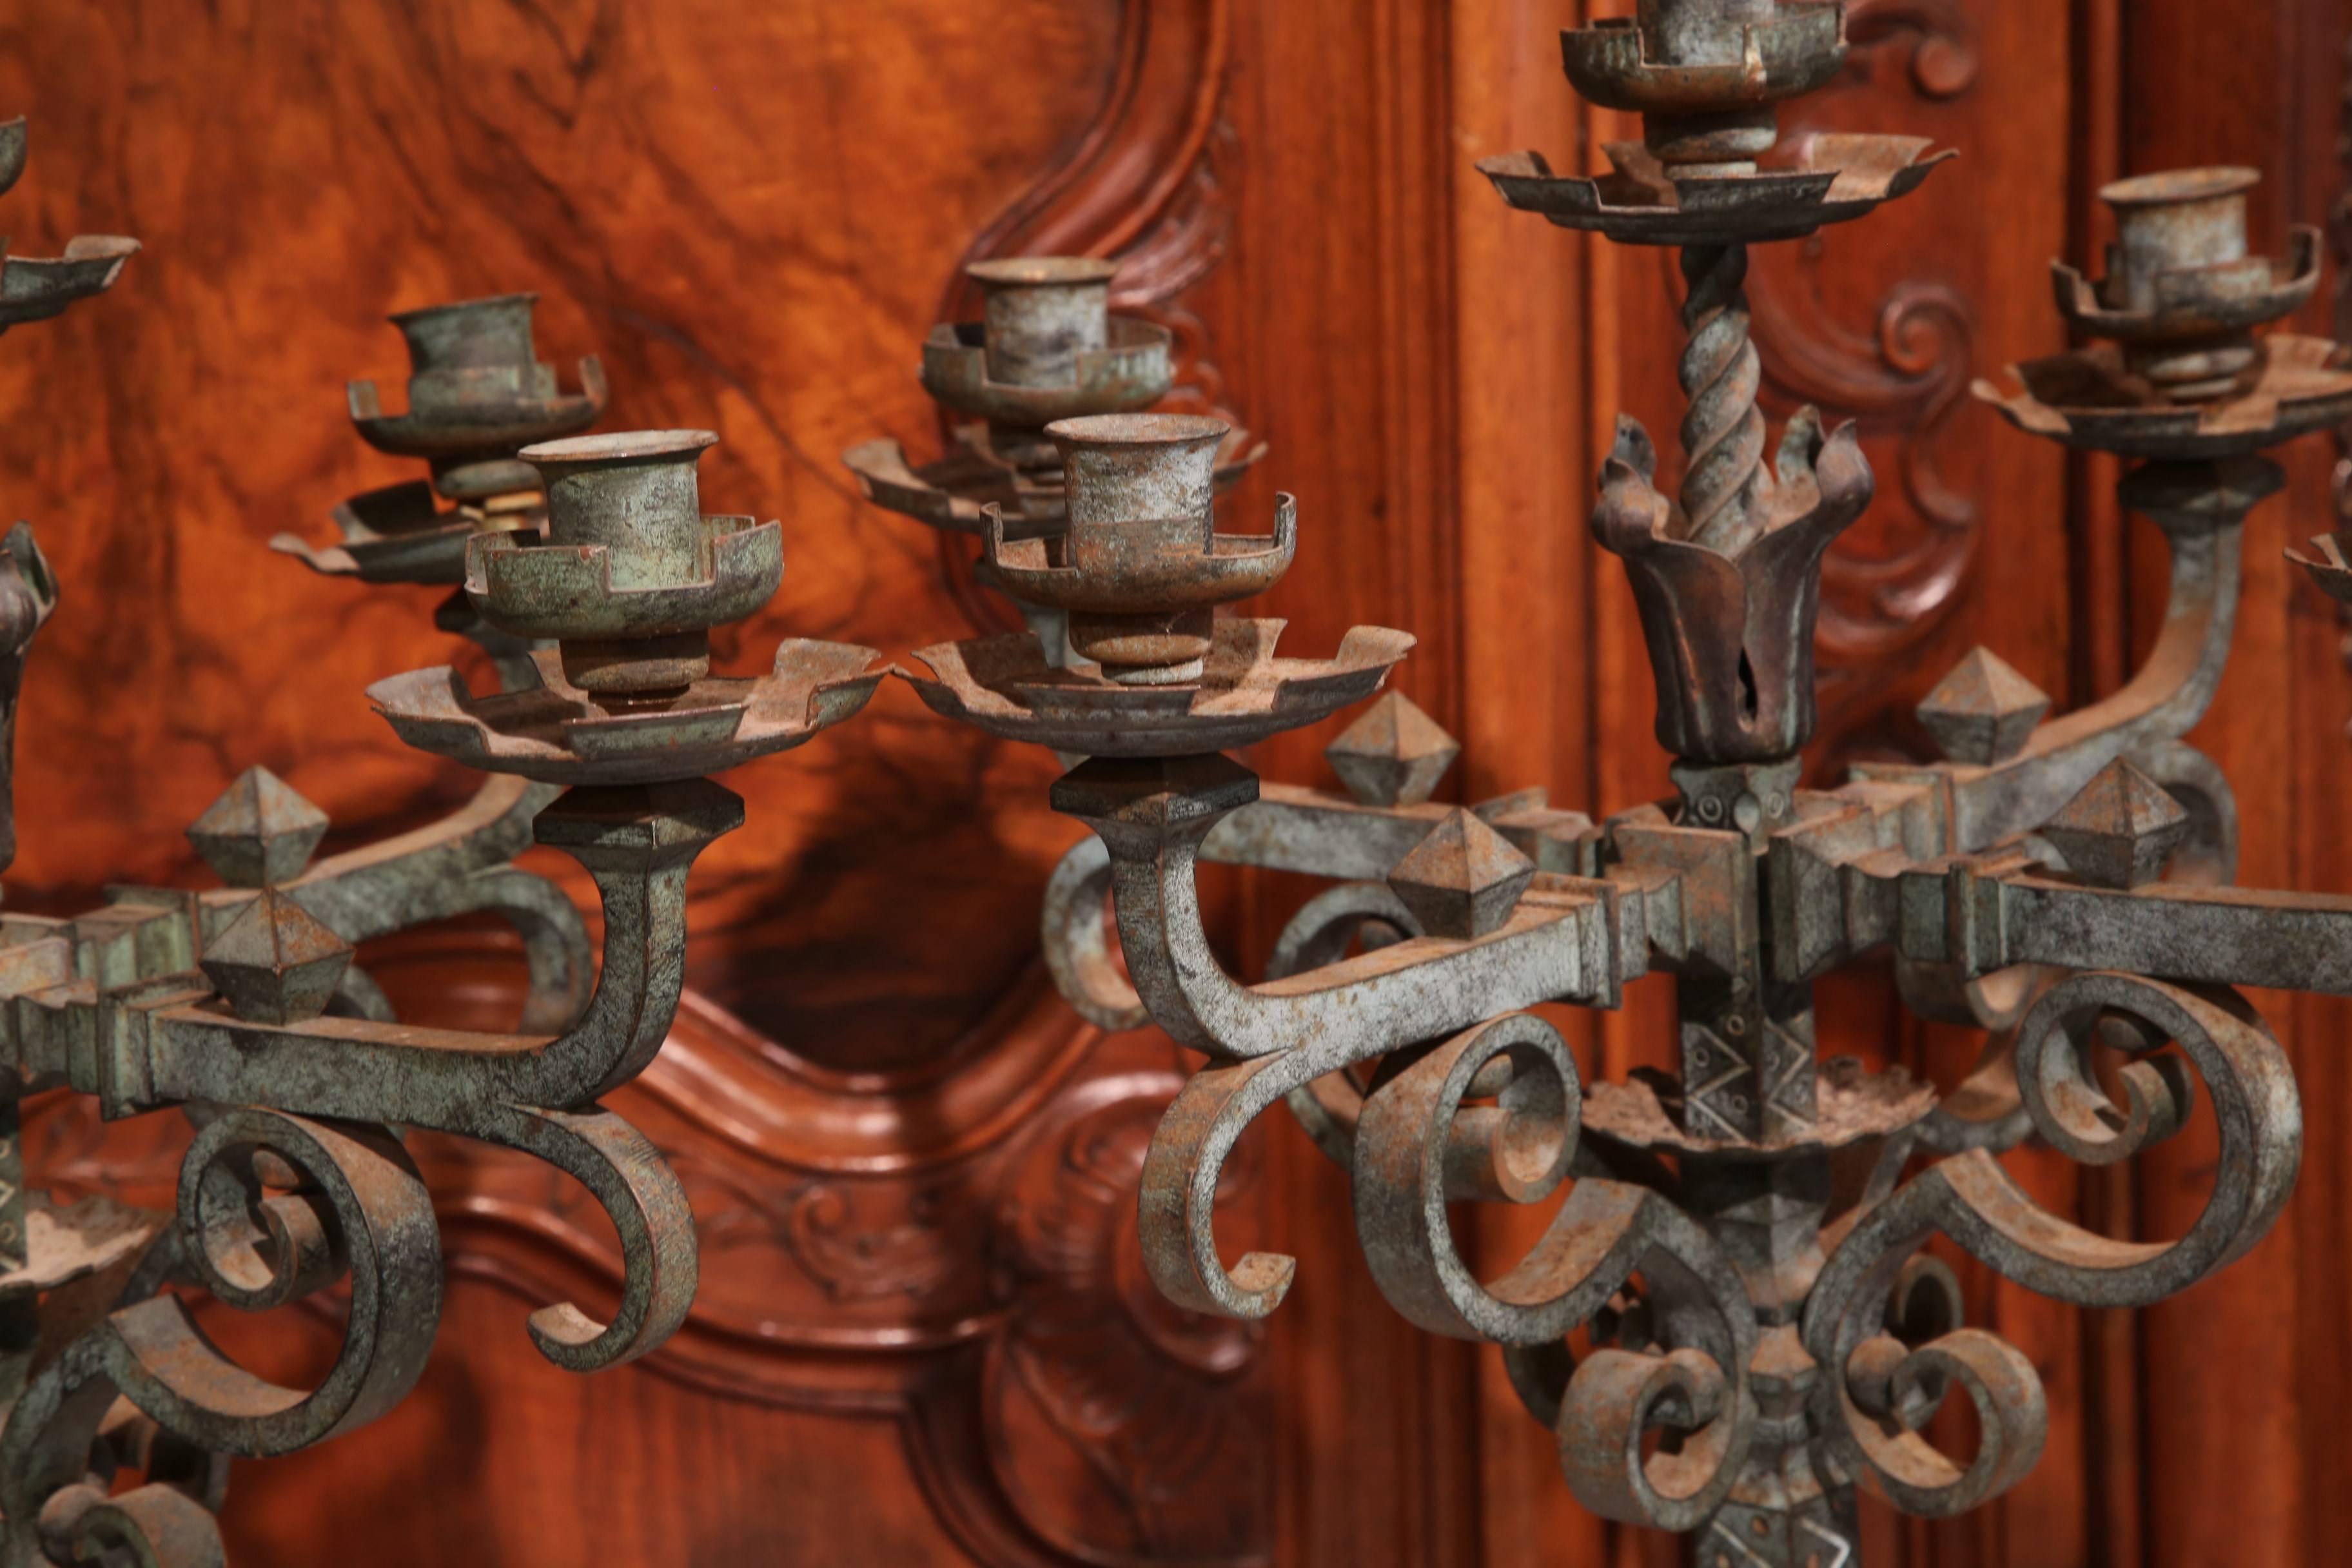 Wrought Iron Pair of 18th Century French Iron Candelabras with Original Verdigris Finish